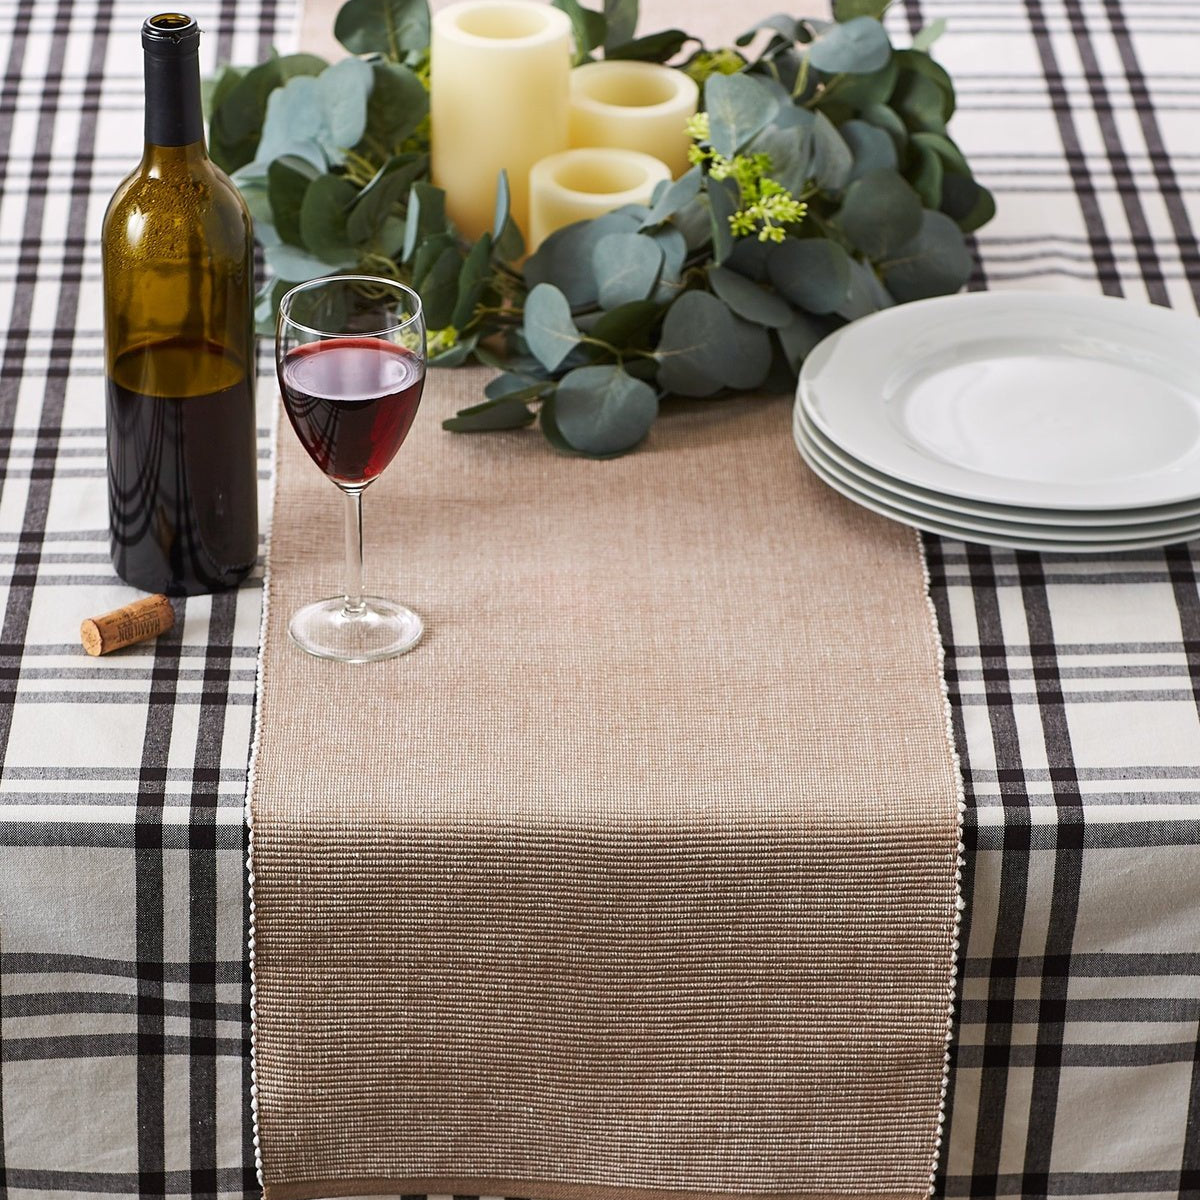 Stone & White 2-tone Ribbed Table Runner 13x108 - Table Runners